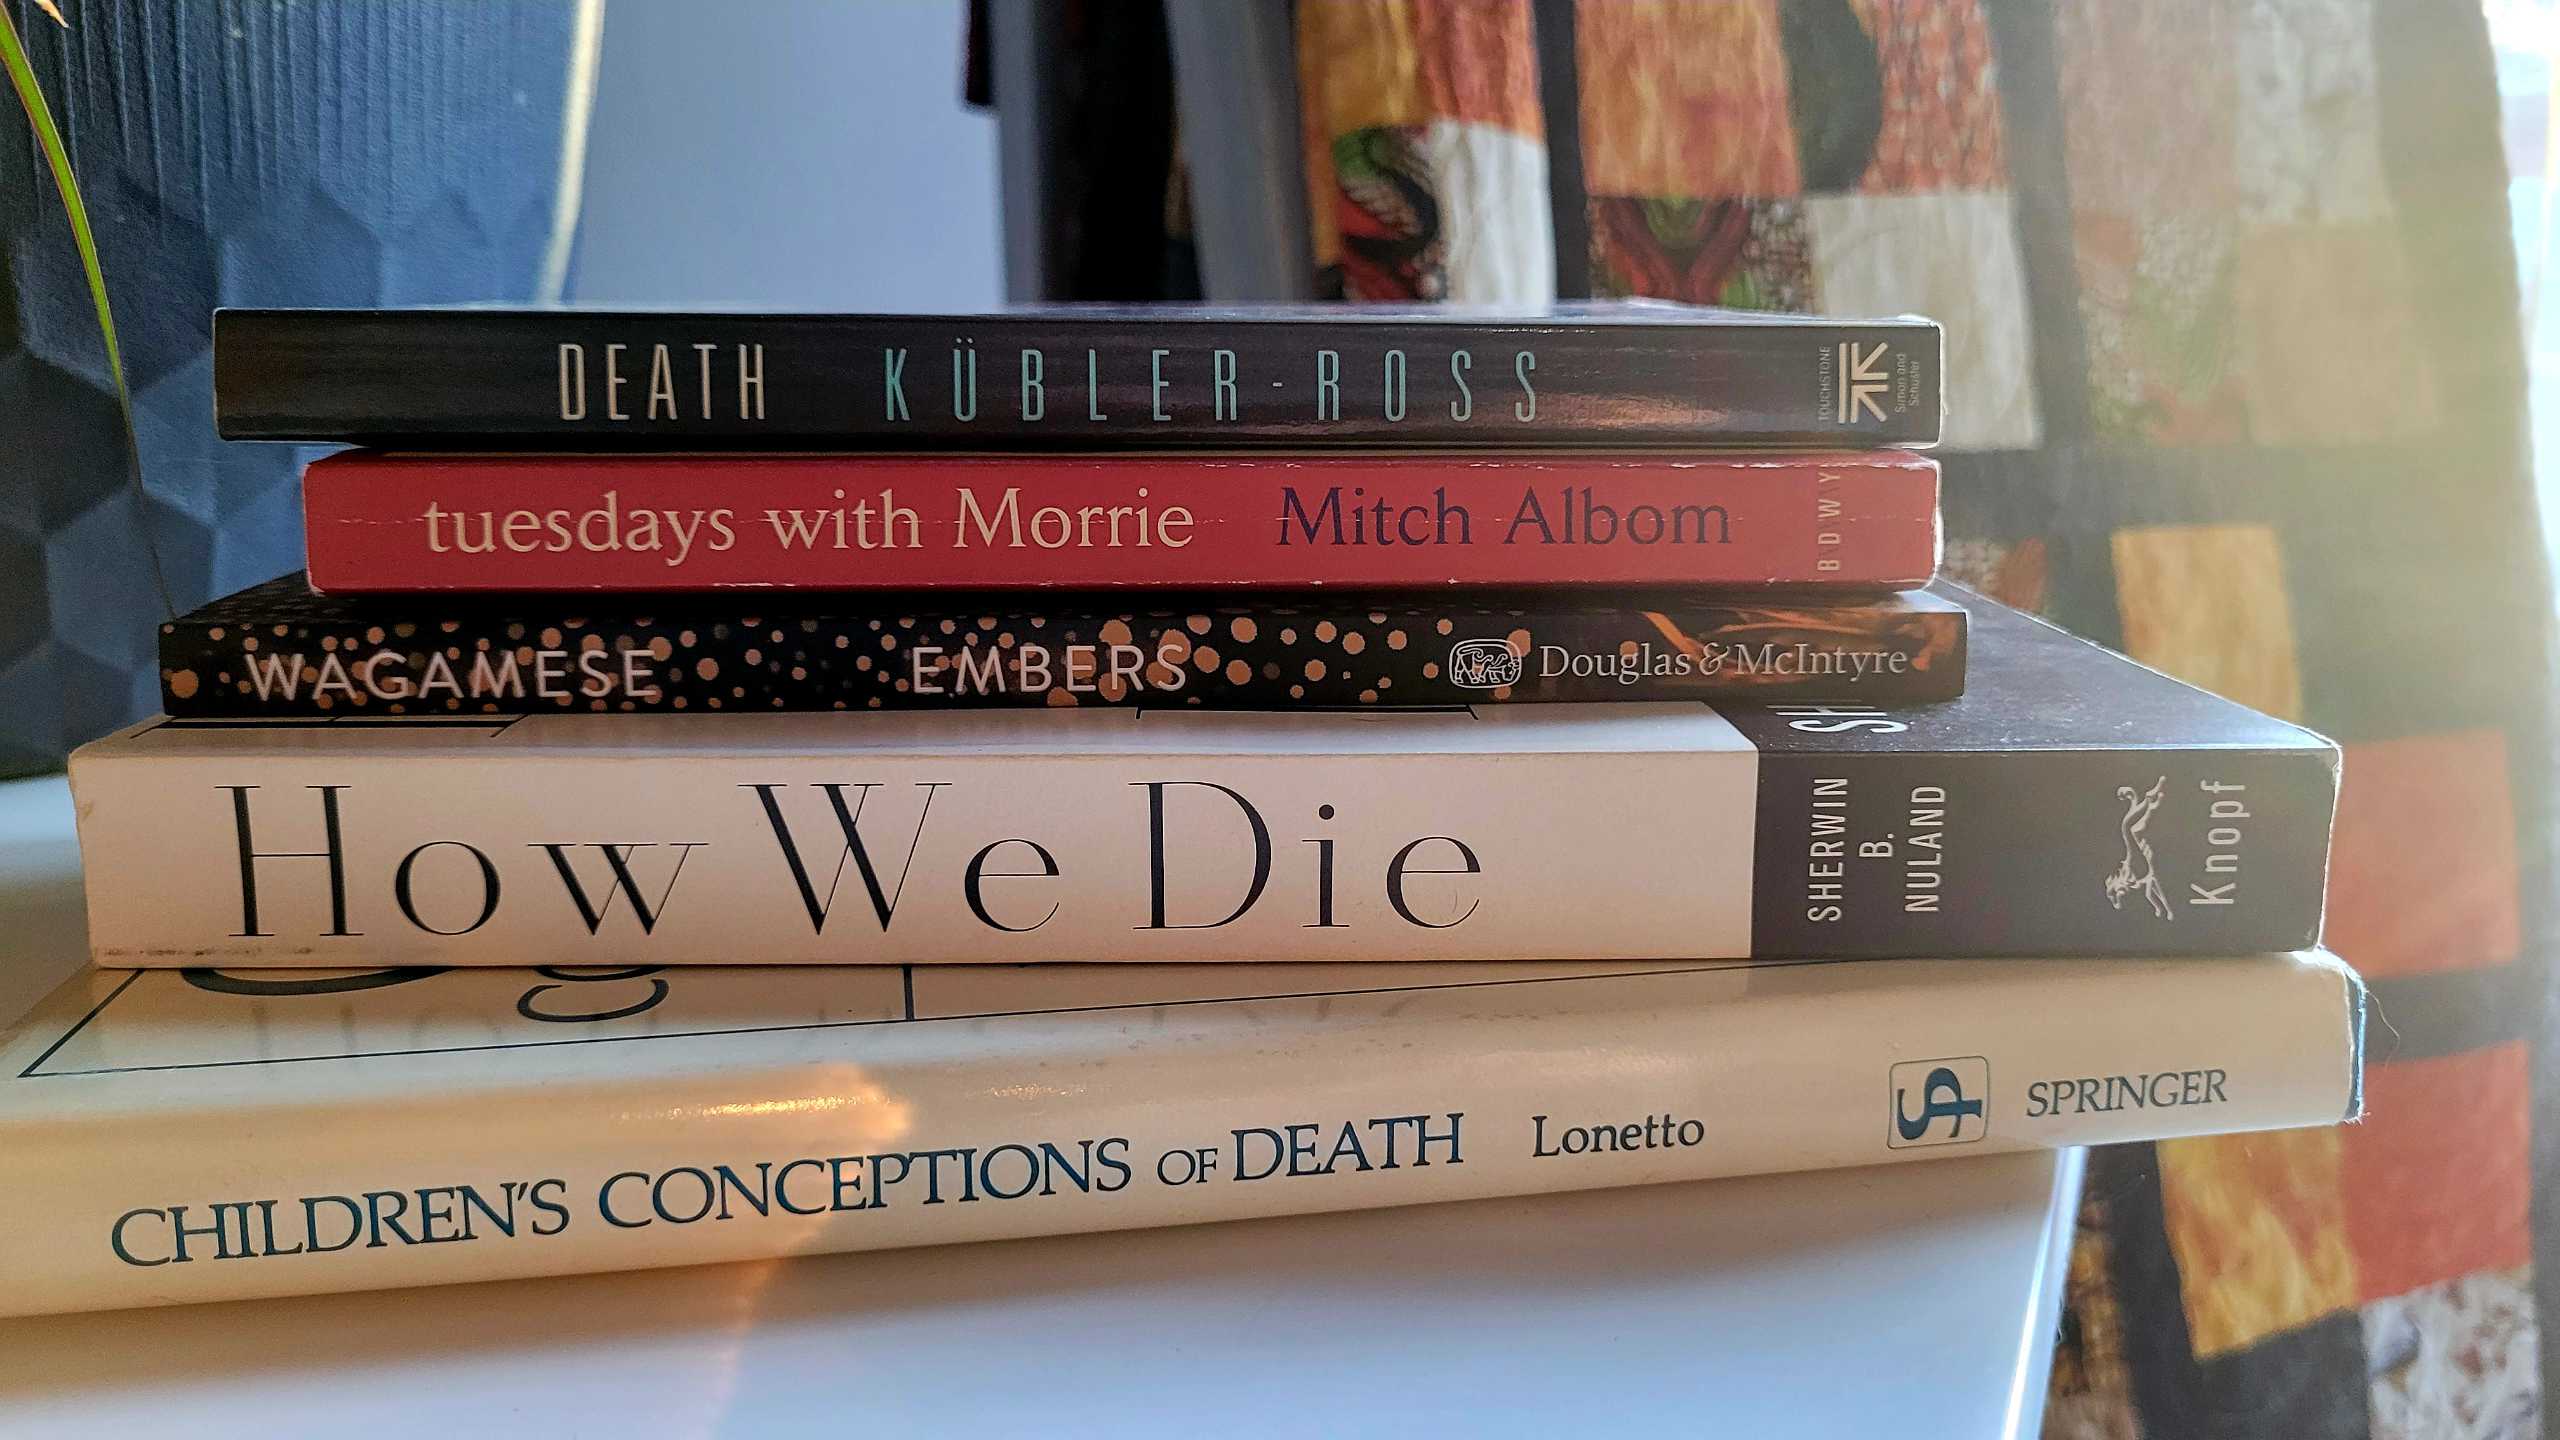 A stack of books related to death and dying